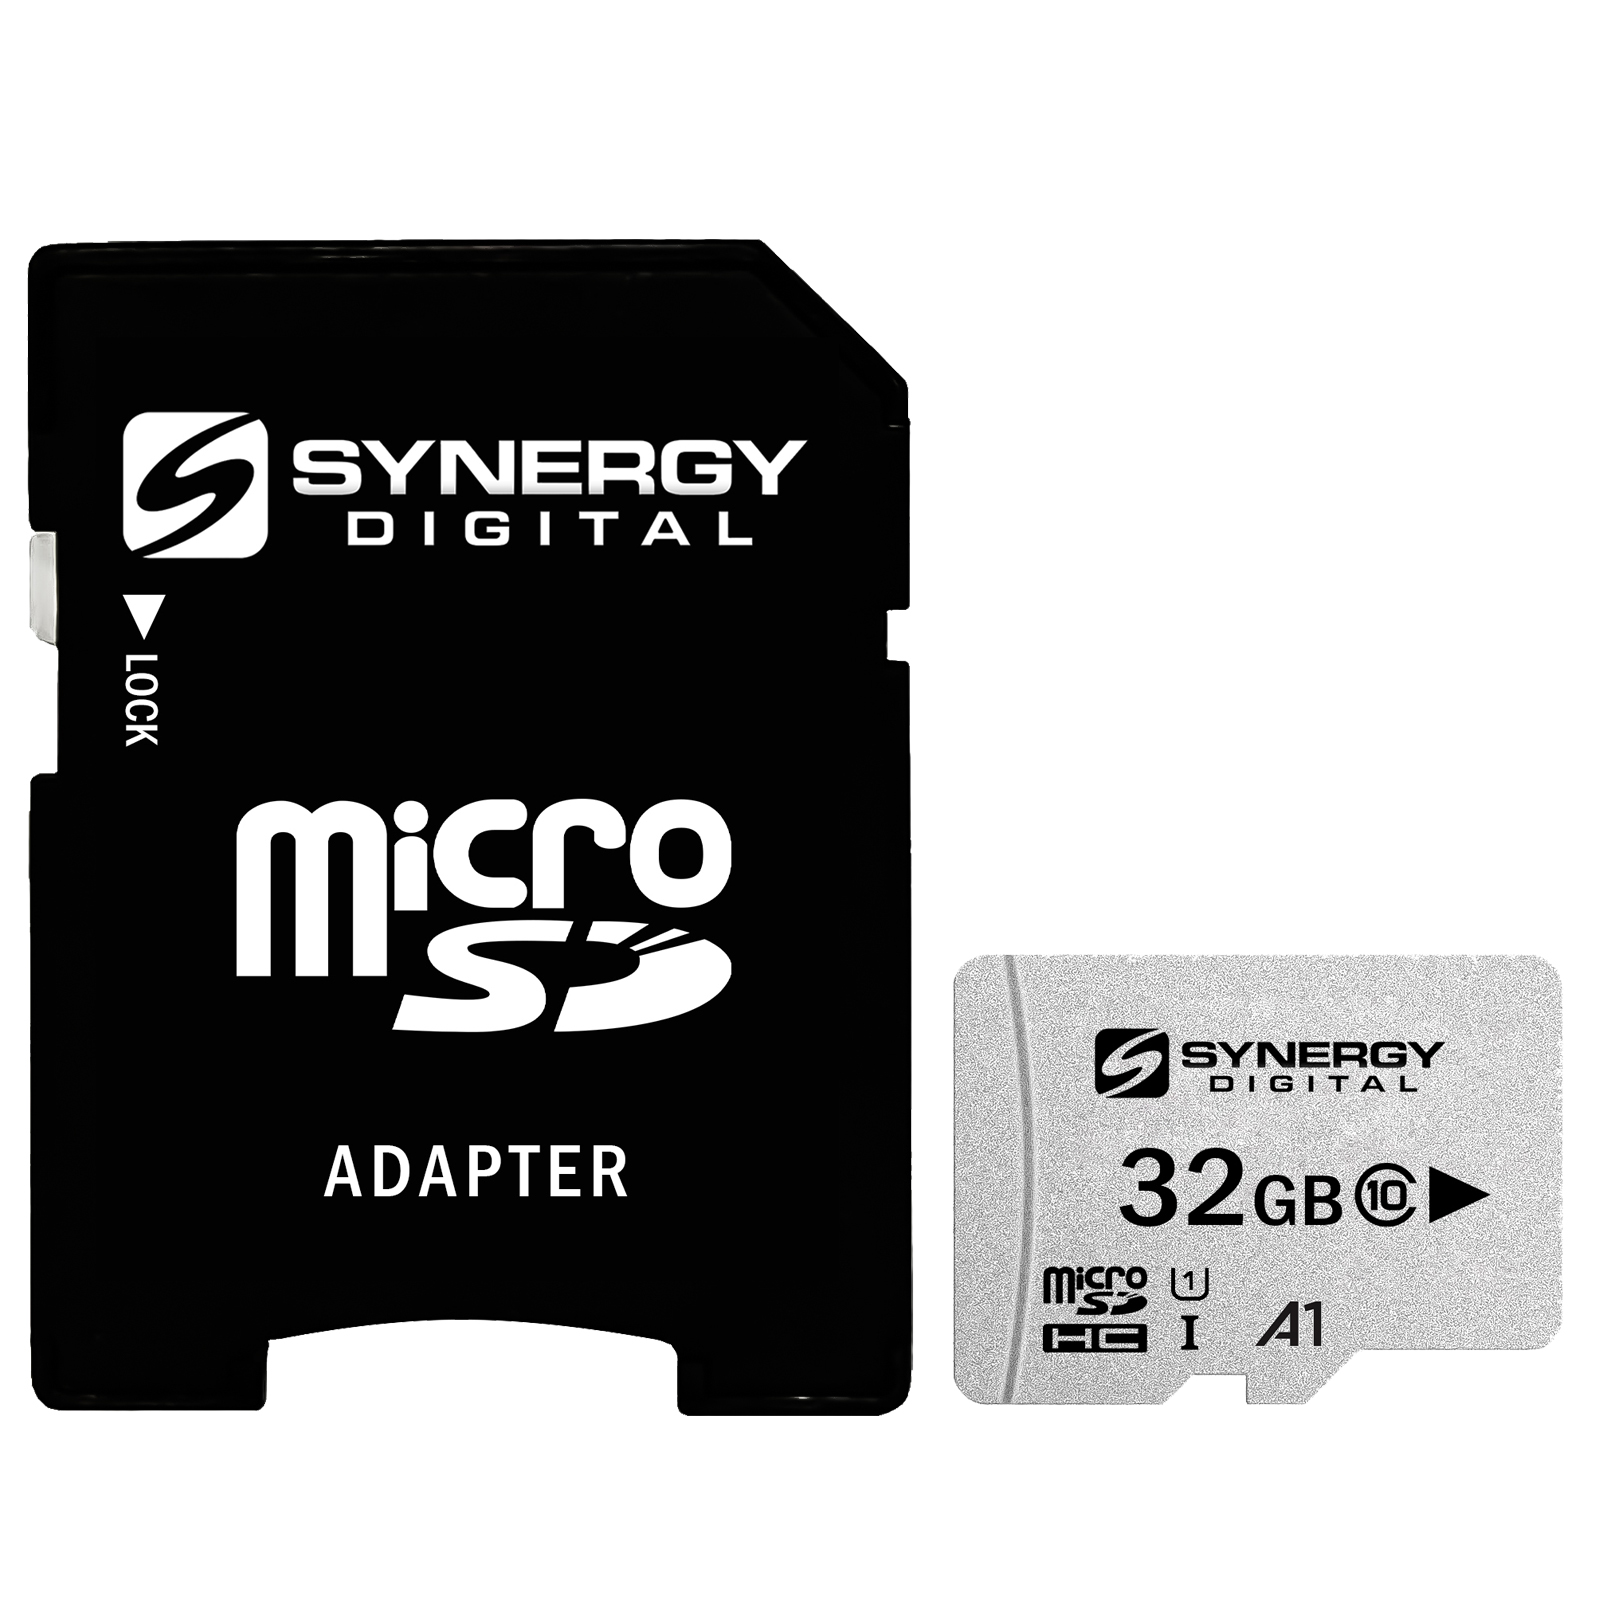 Memory Cards for Replay XDCamcorder